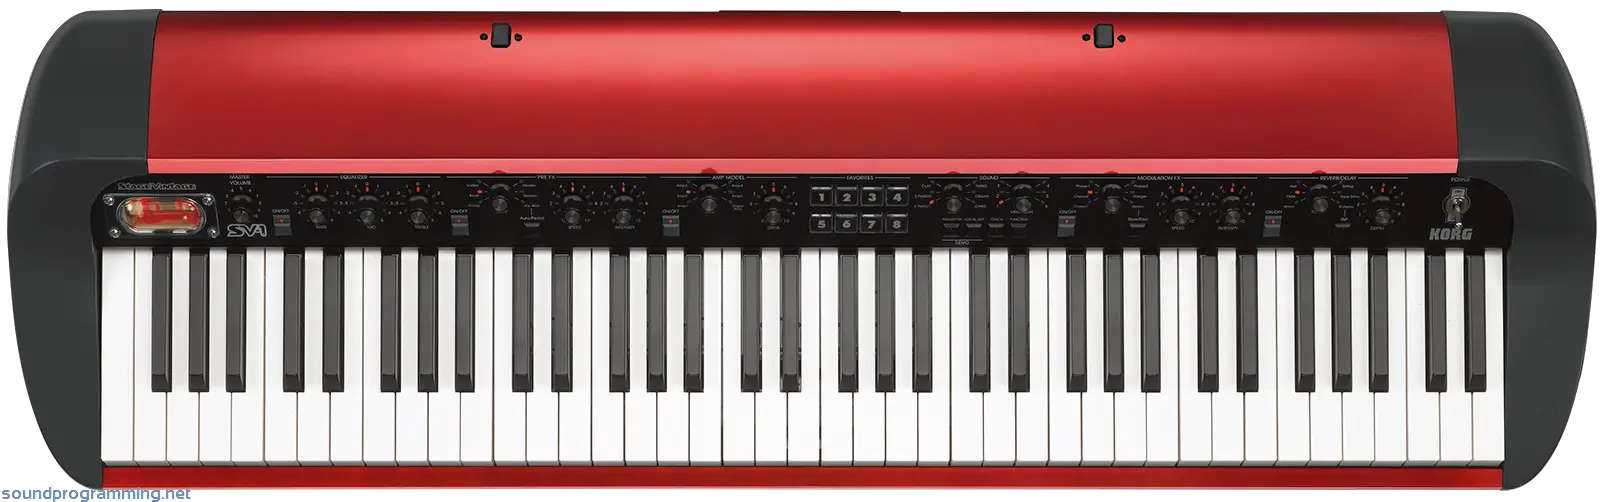 Korg SV-1 73 Red Top View